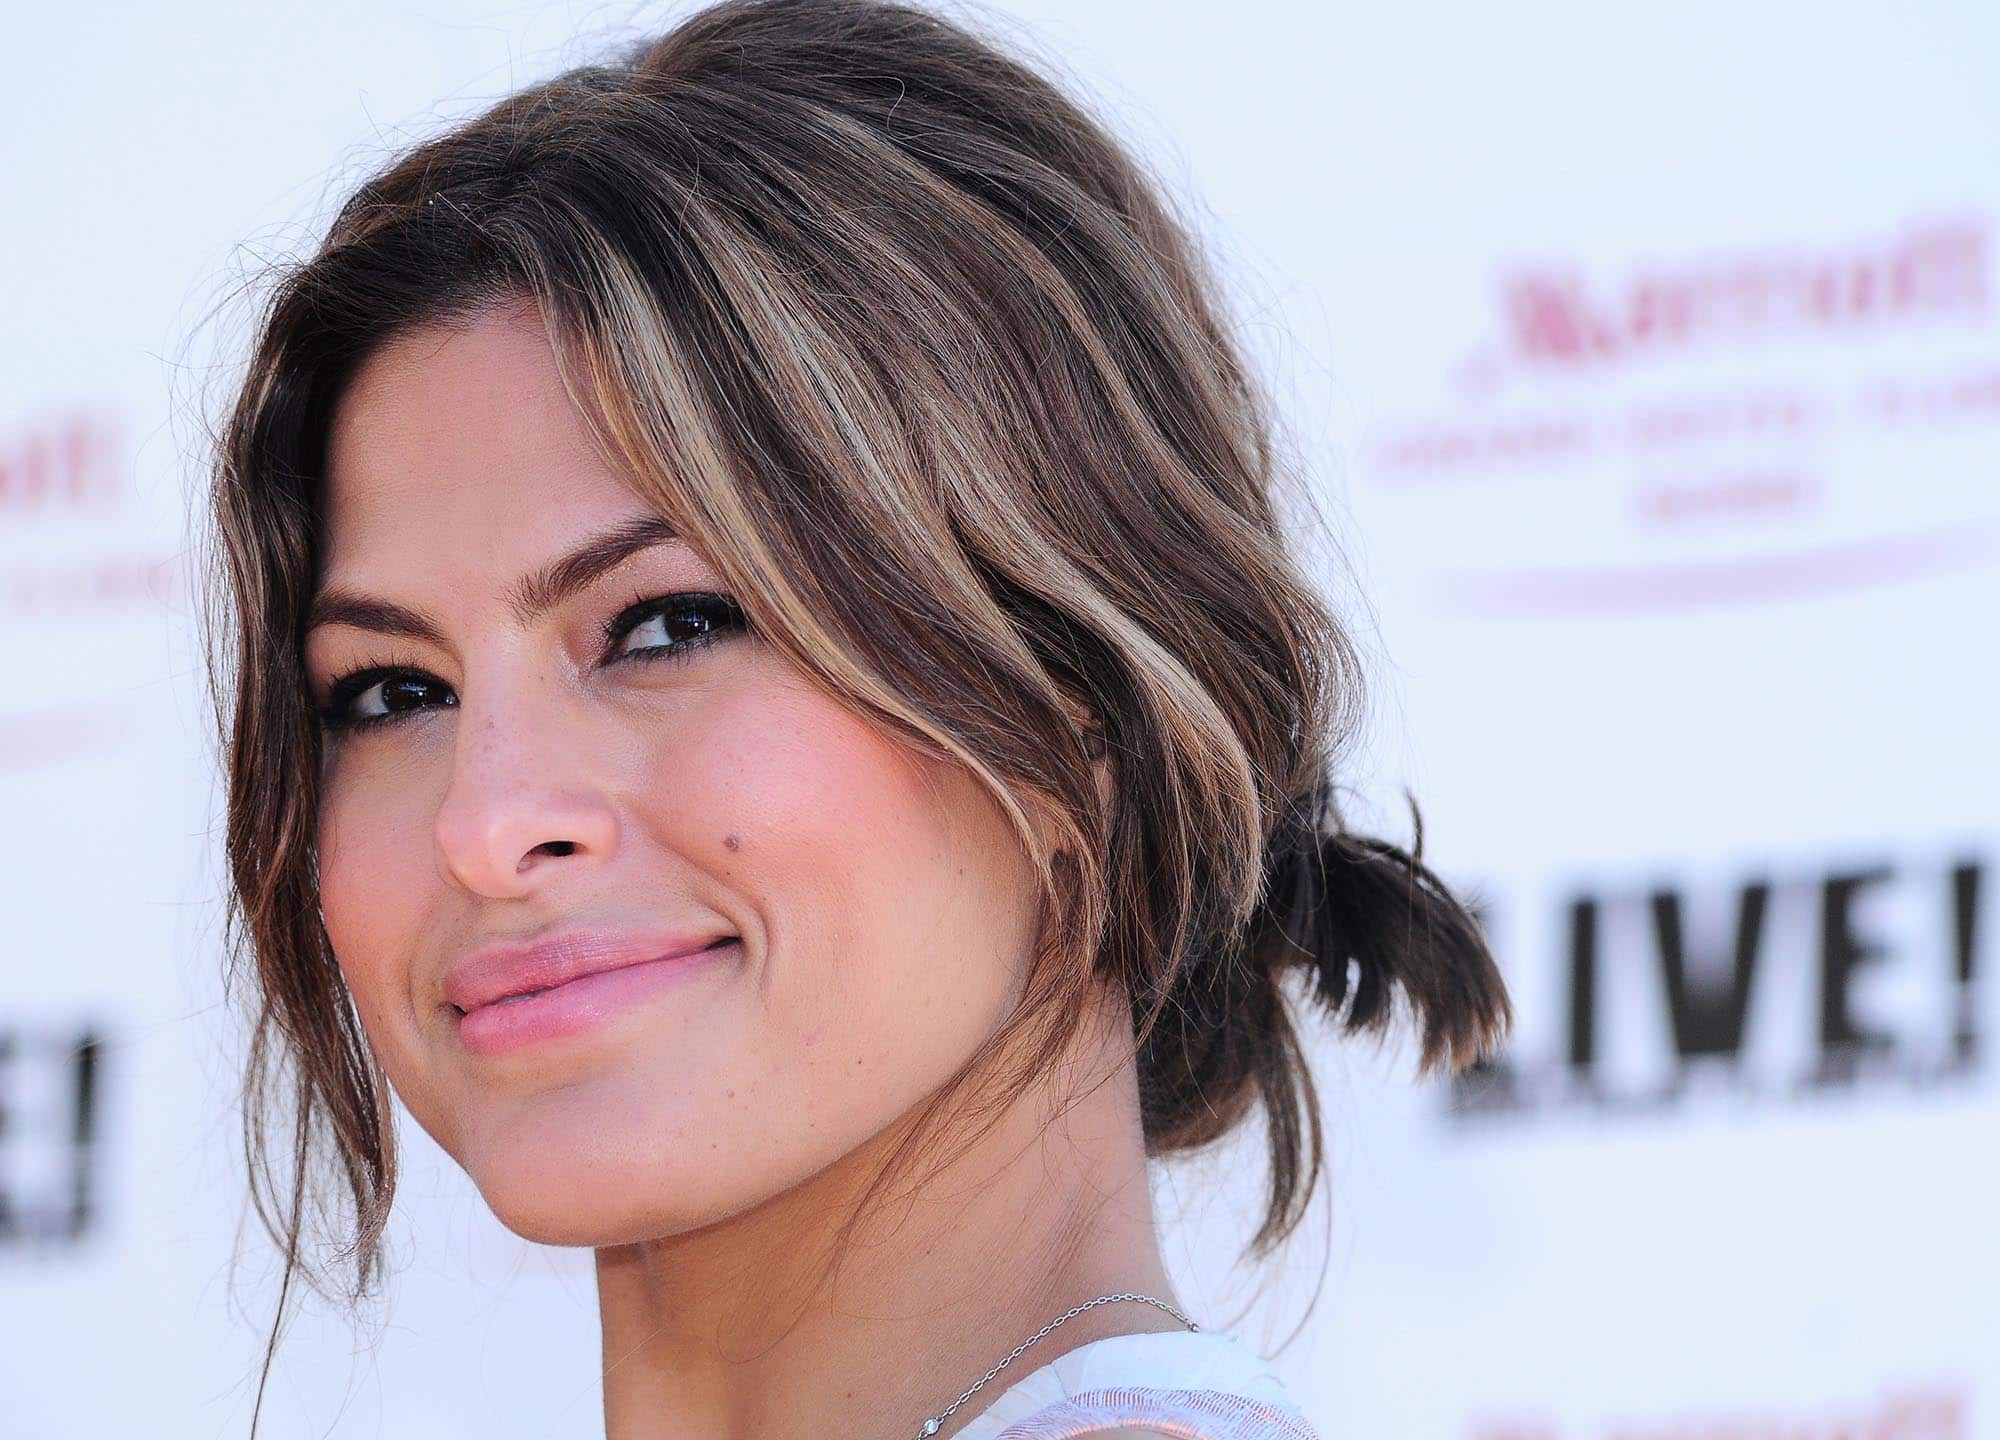 Eva Mendes recently revealed she got a thread lift. Here’s why some doctors don’t recommend the procedure.